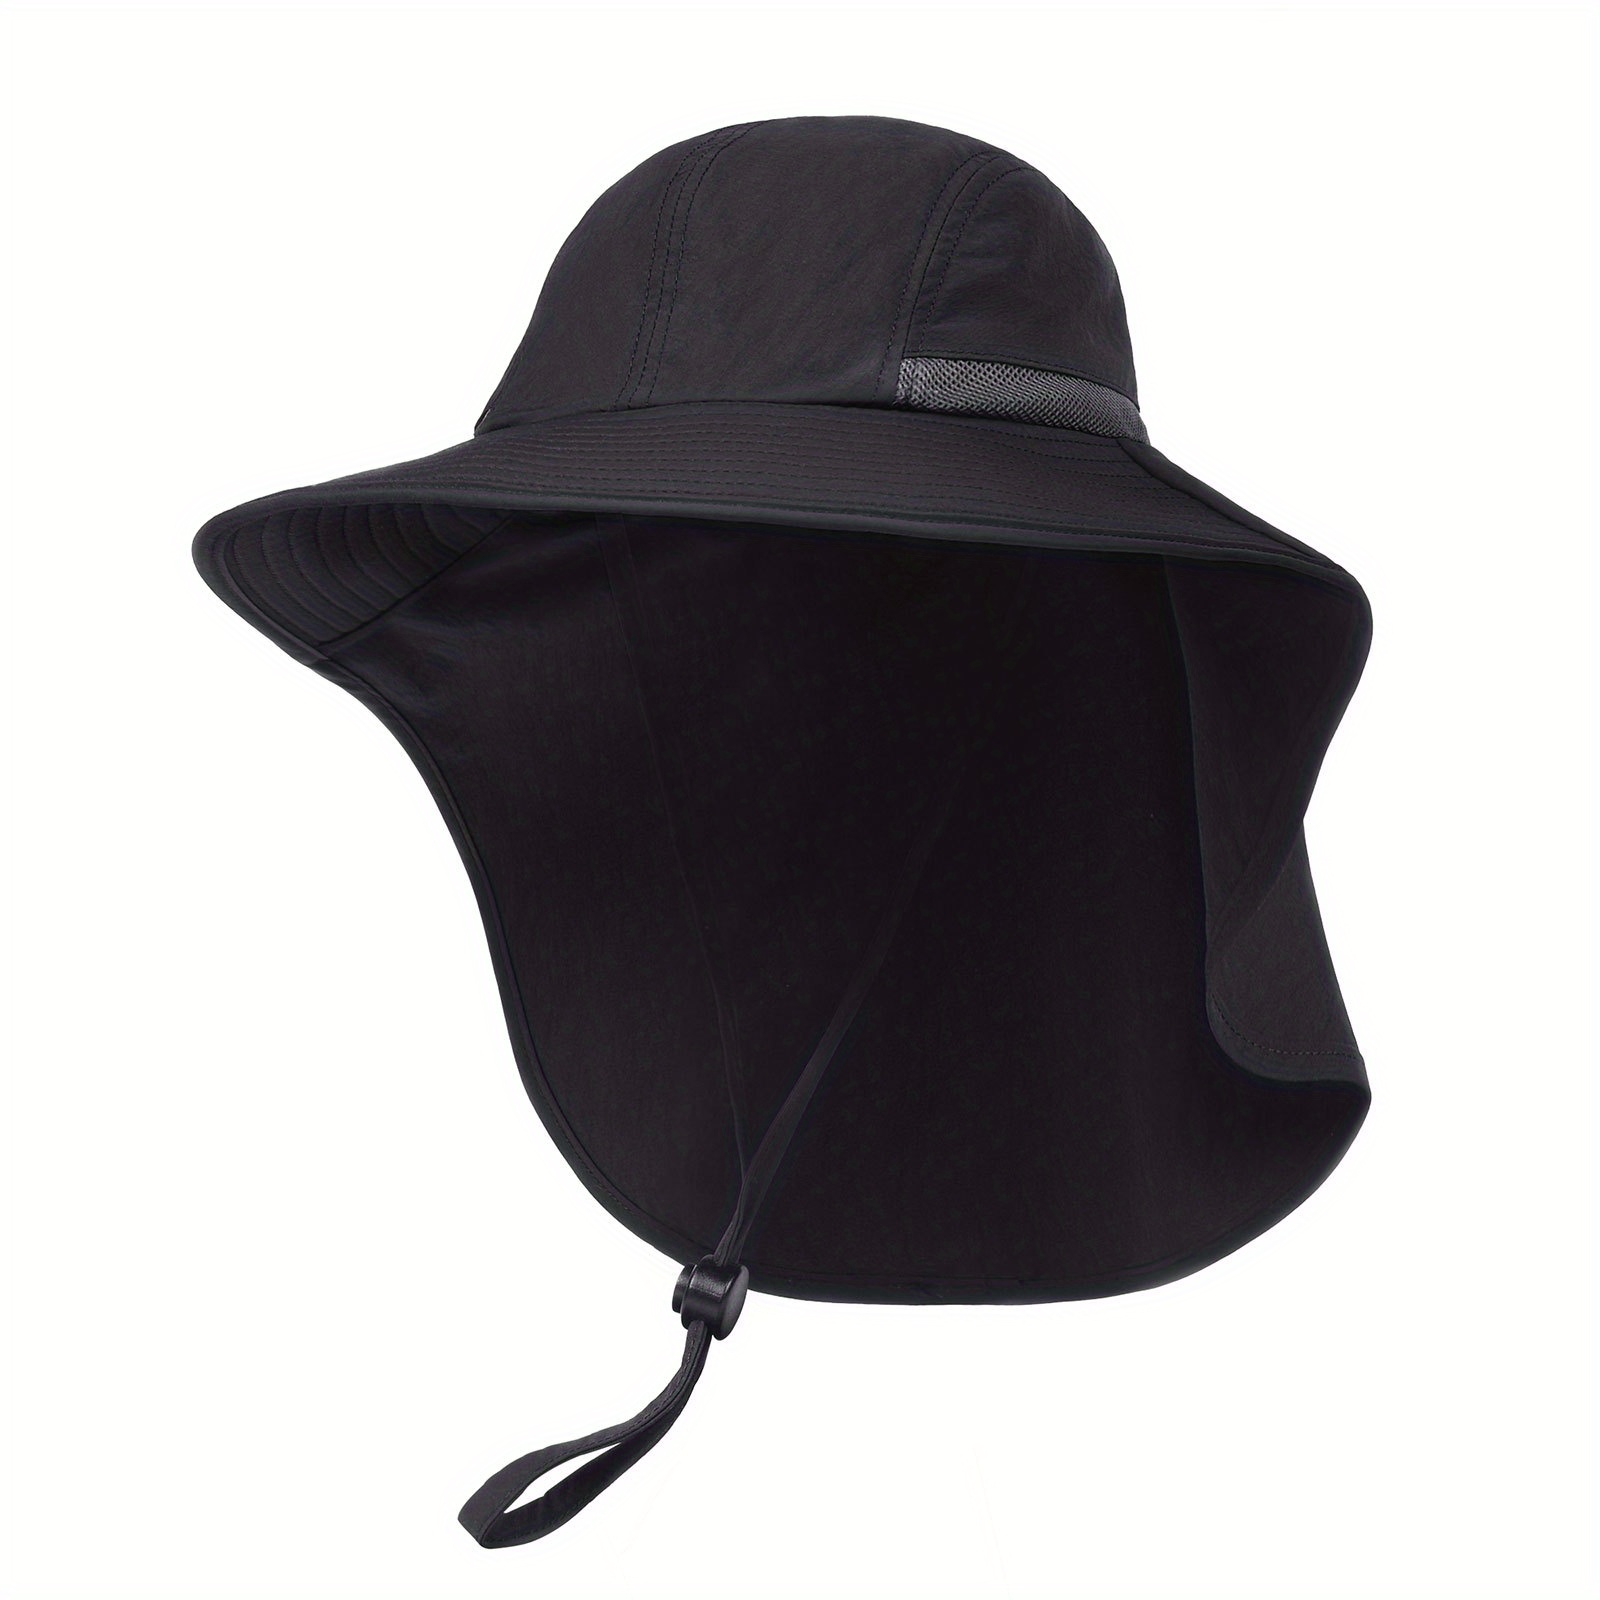 Mgfed Outdoor Sun Hat For Men Wide Brim Fishing Hat With Neck Flap